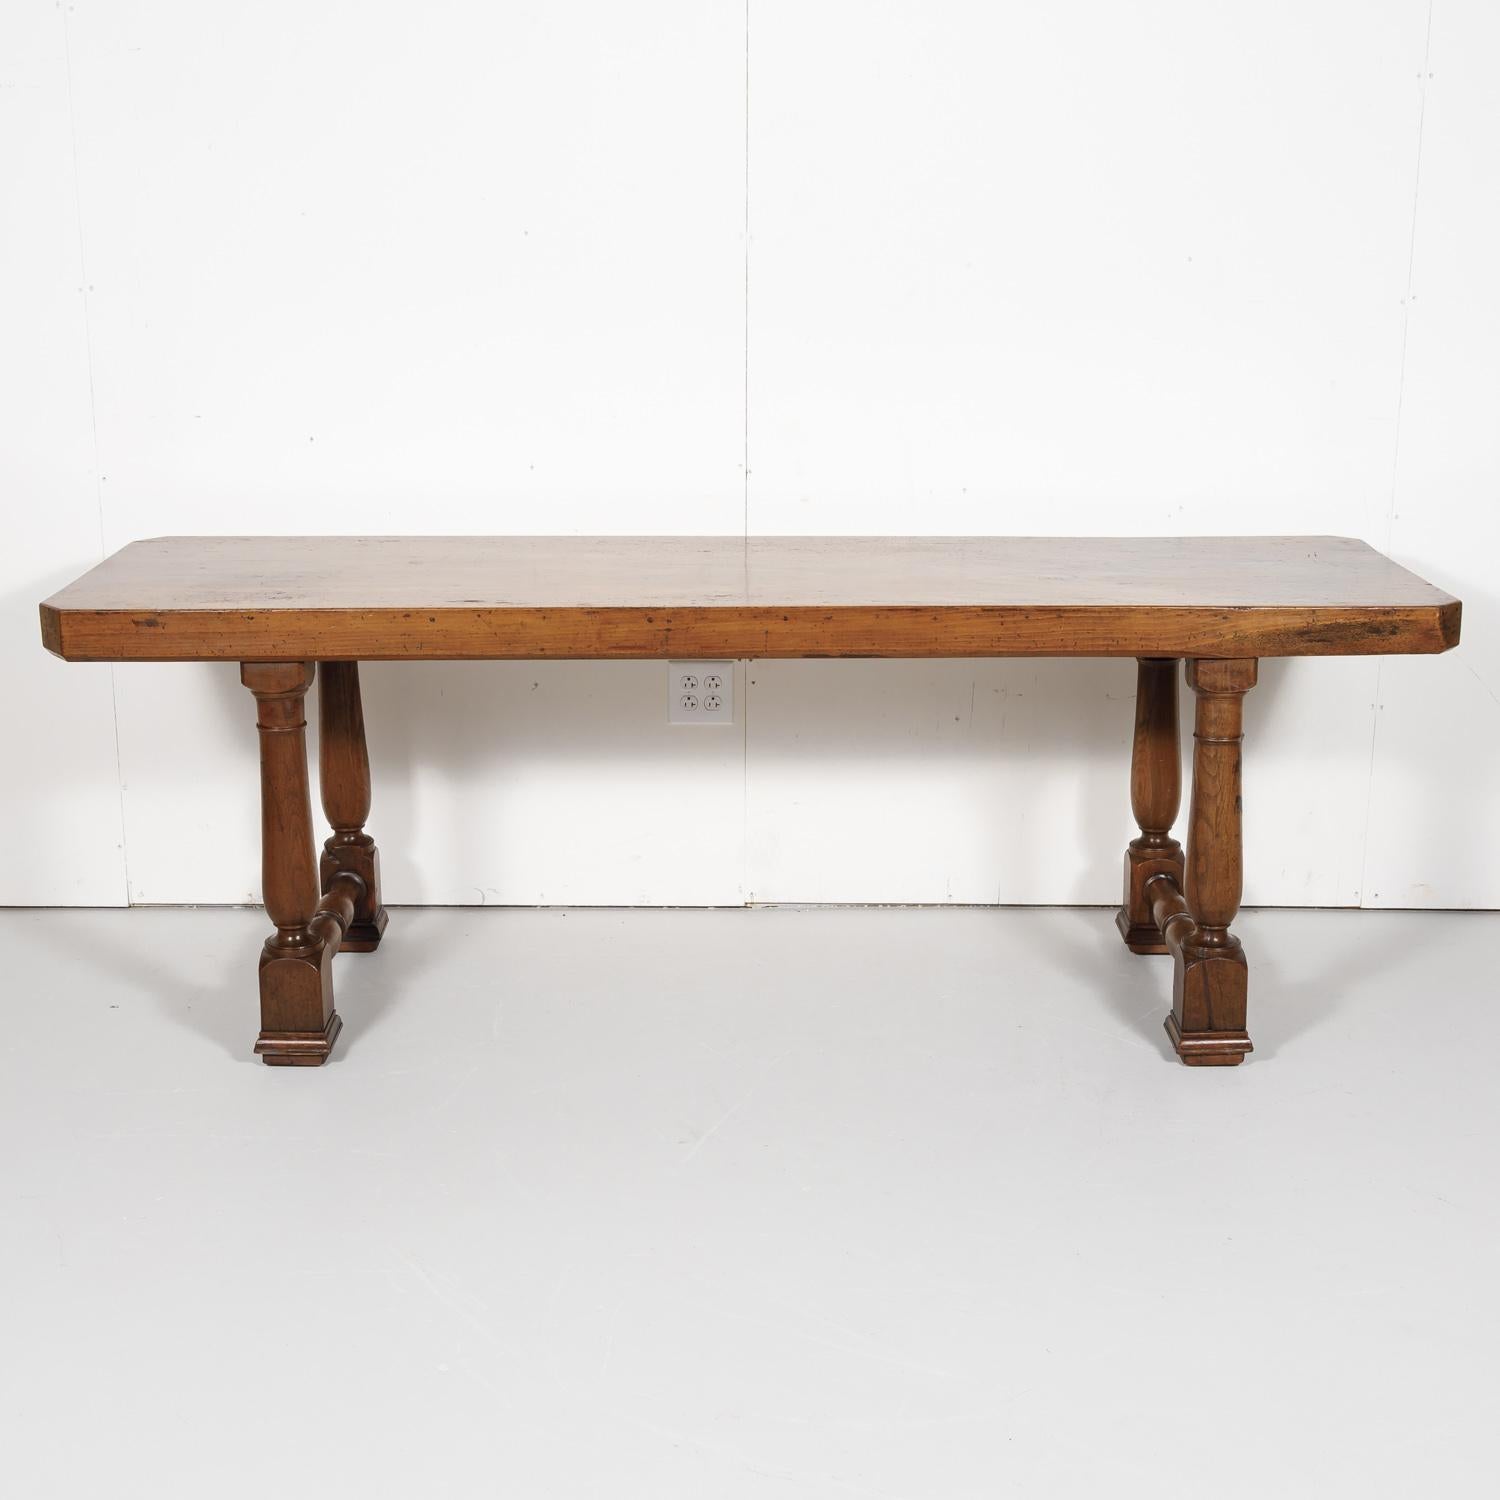 French Provincial 18th Century Solid Walnut Provincial Console or Dining Table